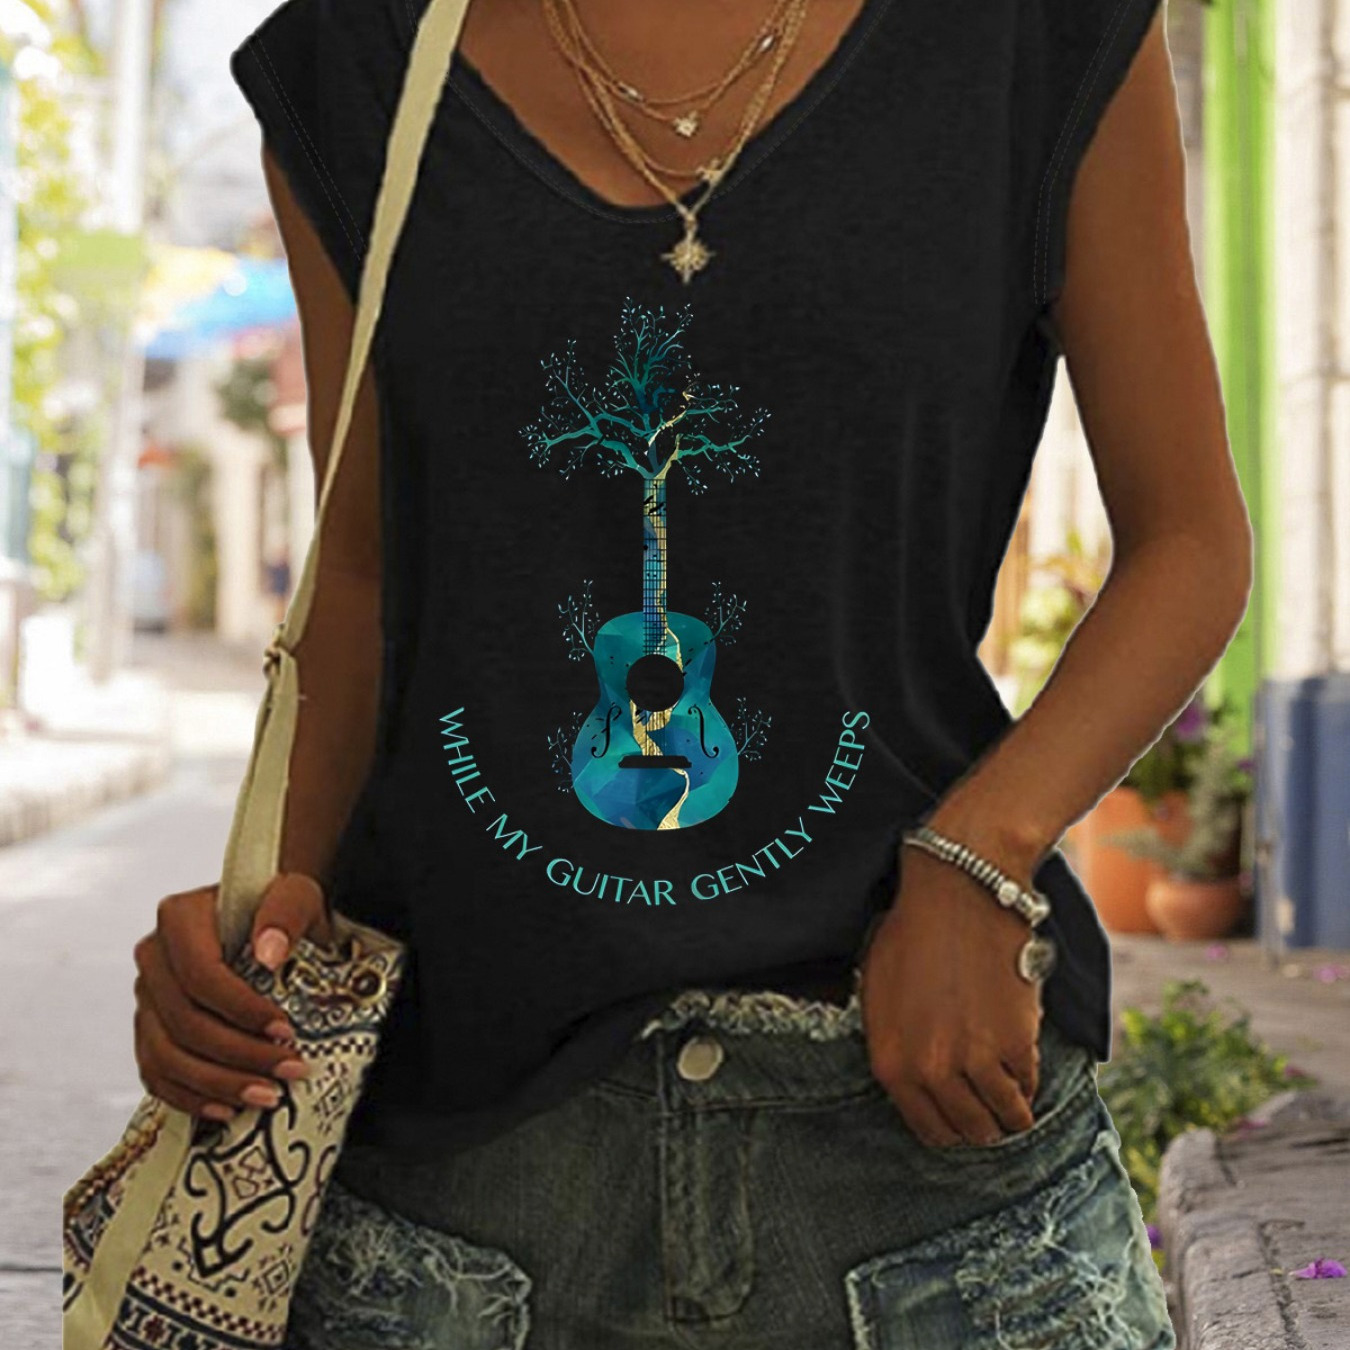 

Guitar Print Tank Top, Casual V Neck Tank Top For Summer, Women's Clothing